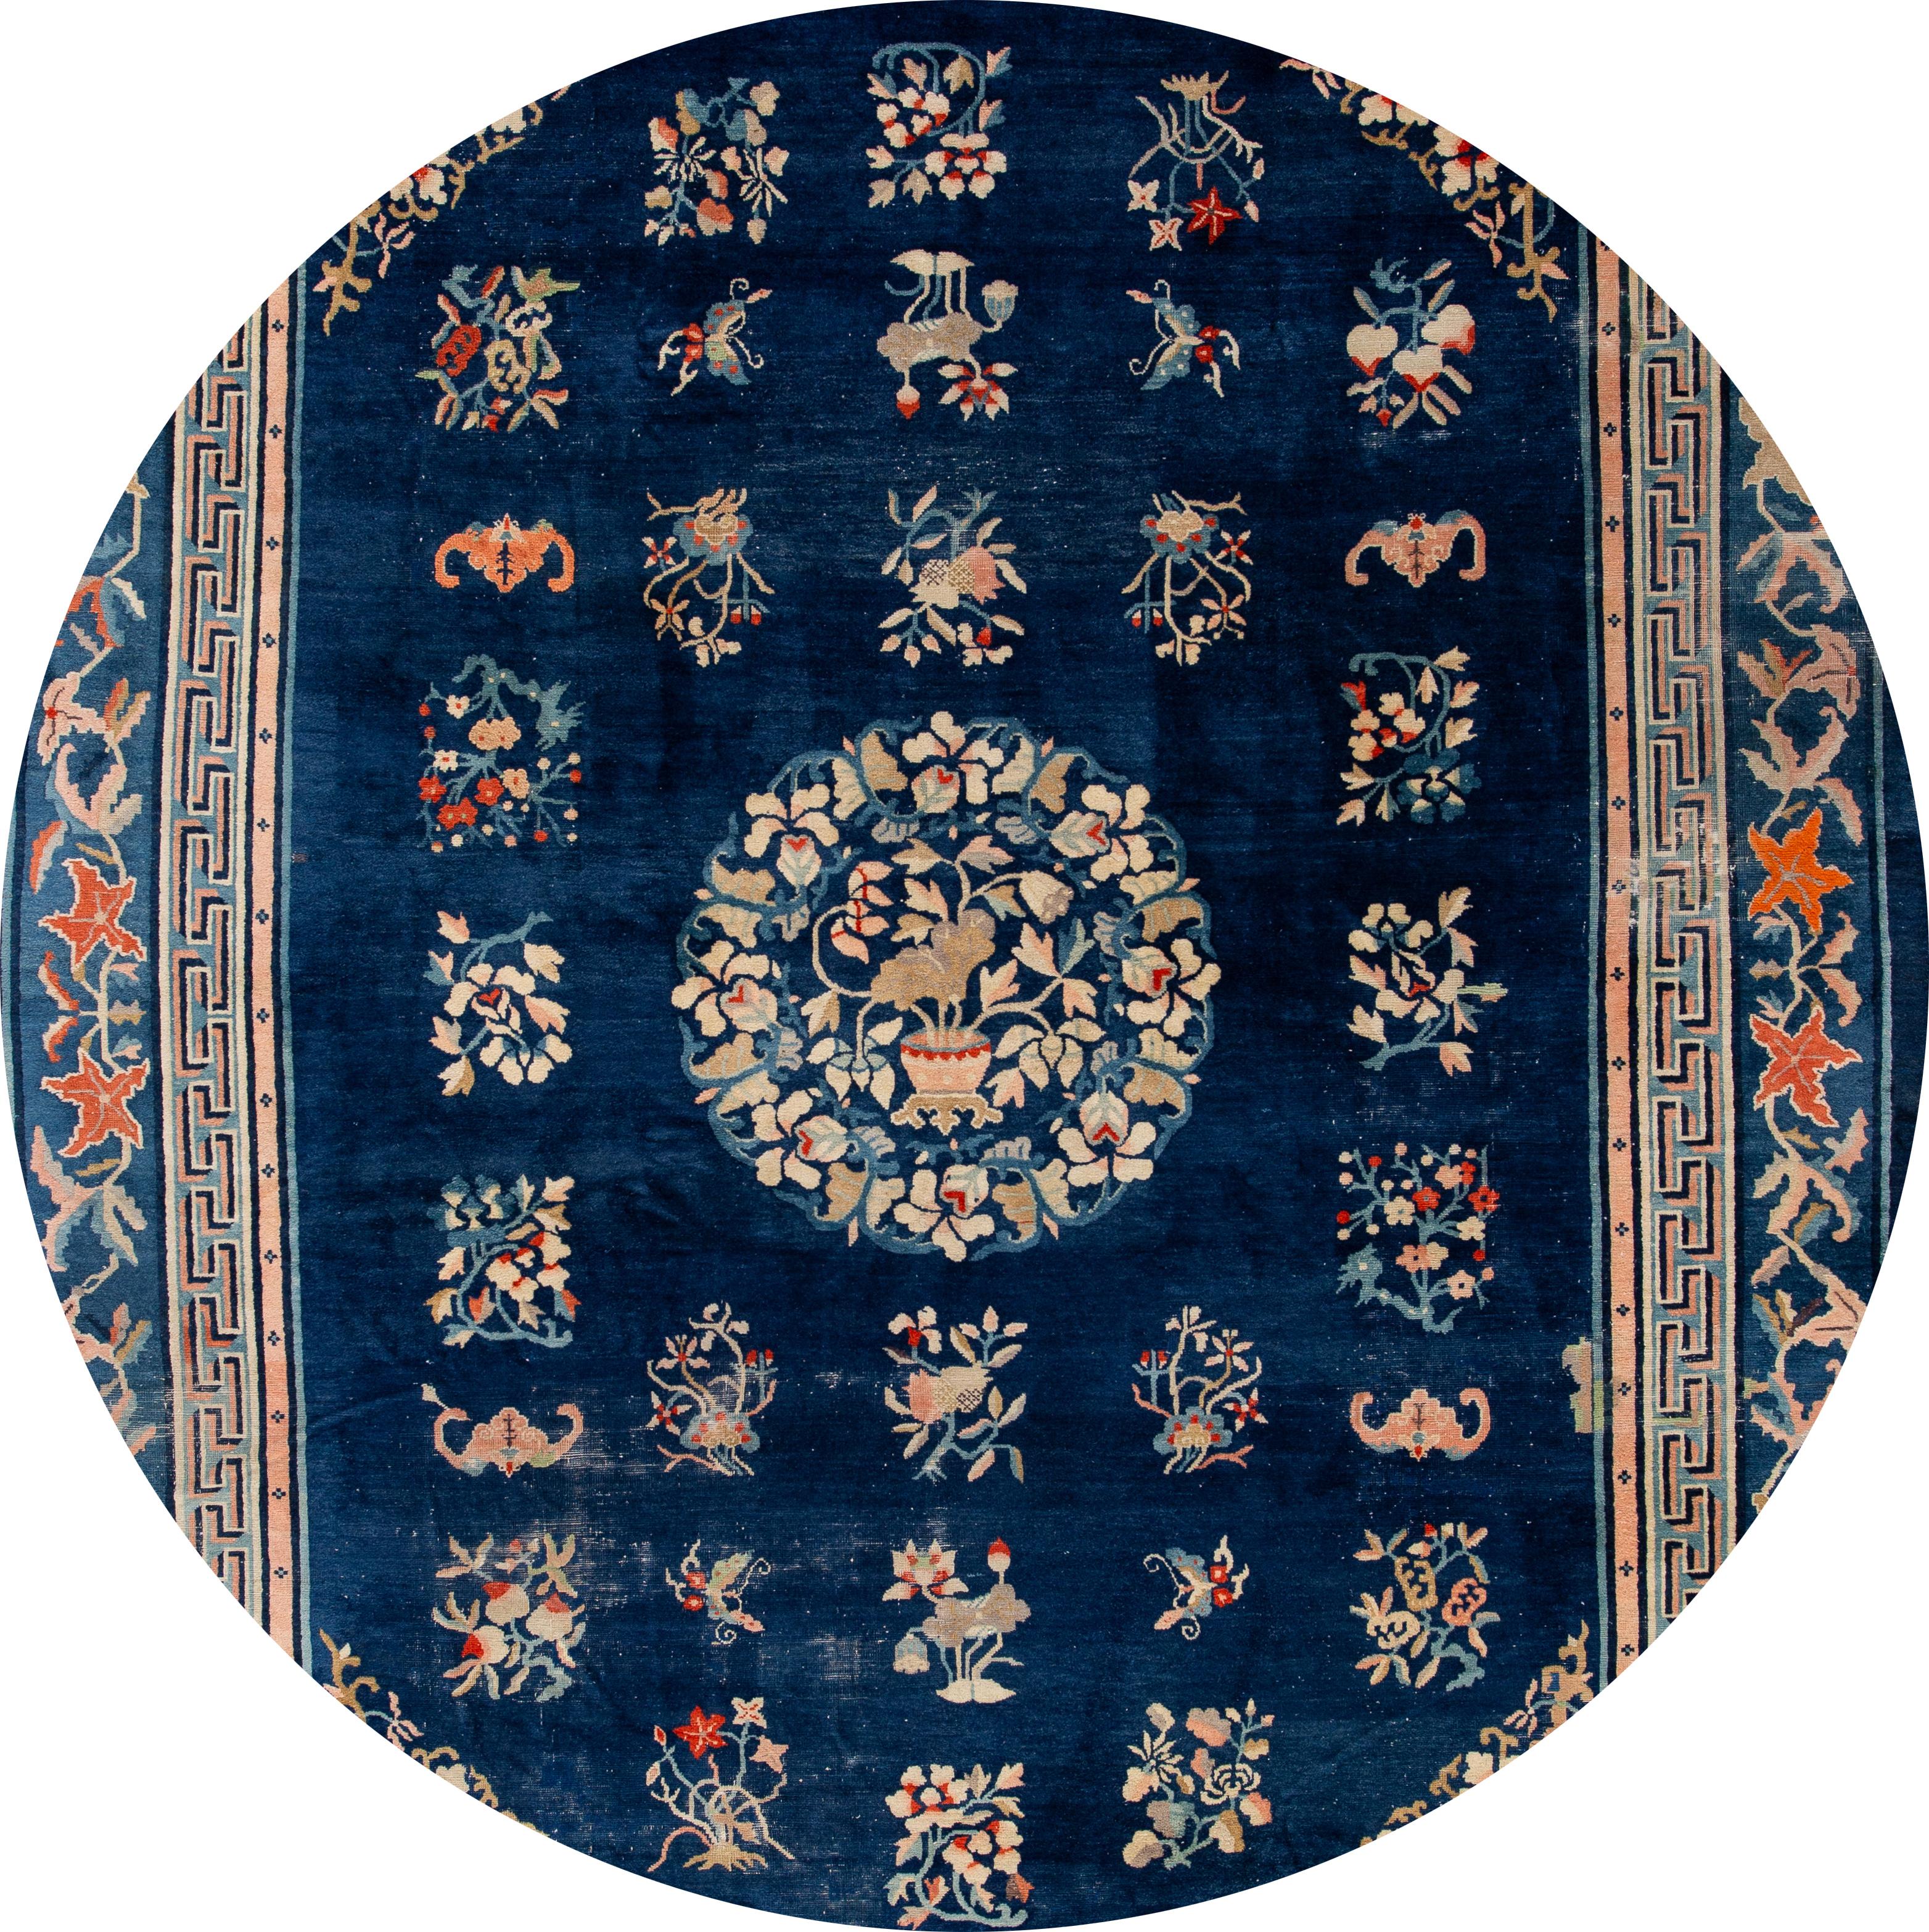 Beautiful antique Chinese Art Deco rug, hand knotted wool with a navy-blue field, tan frame in a subtle all-over Classic Chinese floral design.
This rug measures: 9'10